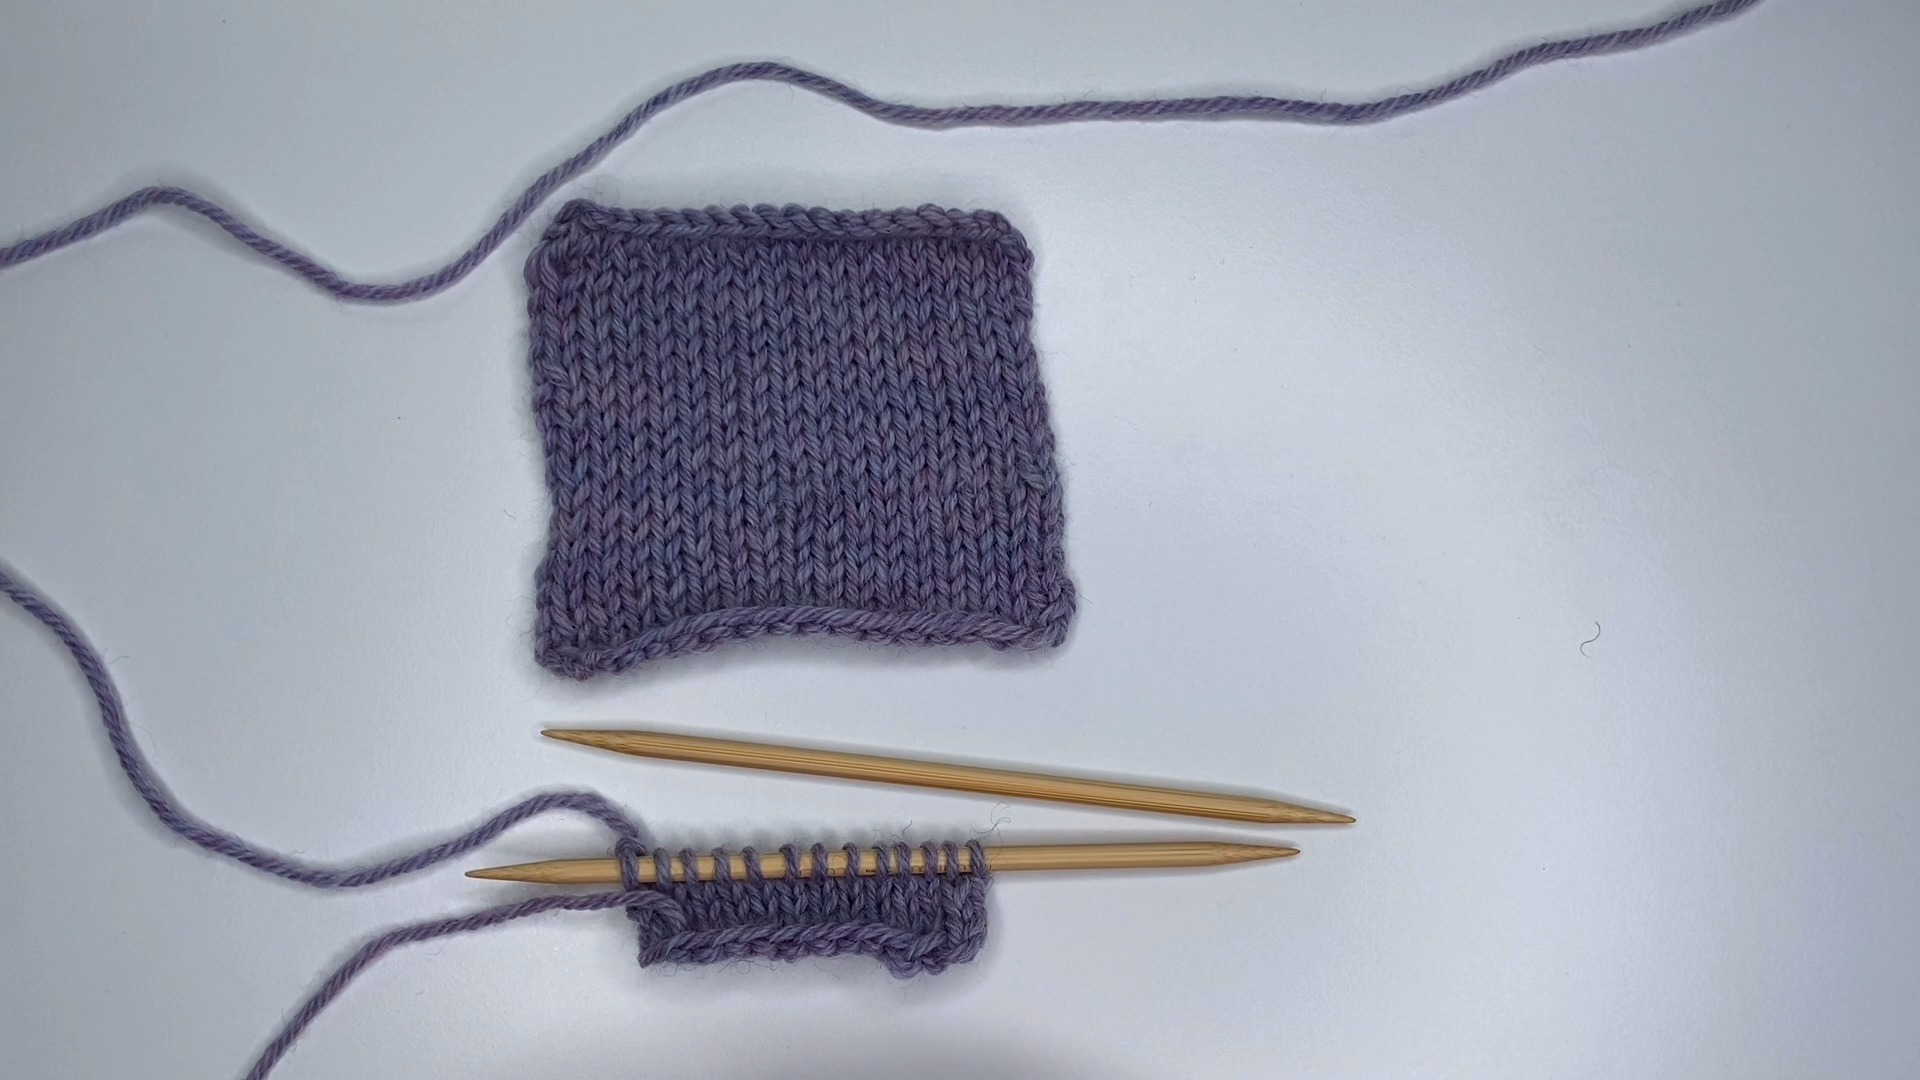 14-Day Learn to Knit Series: Day 5